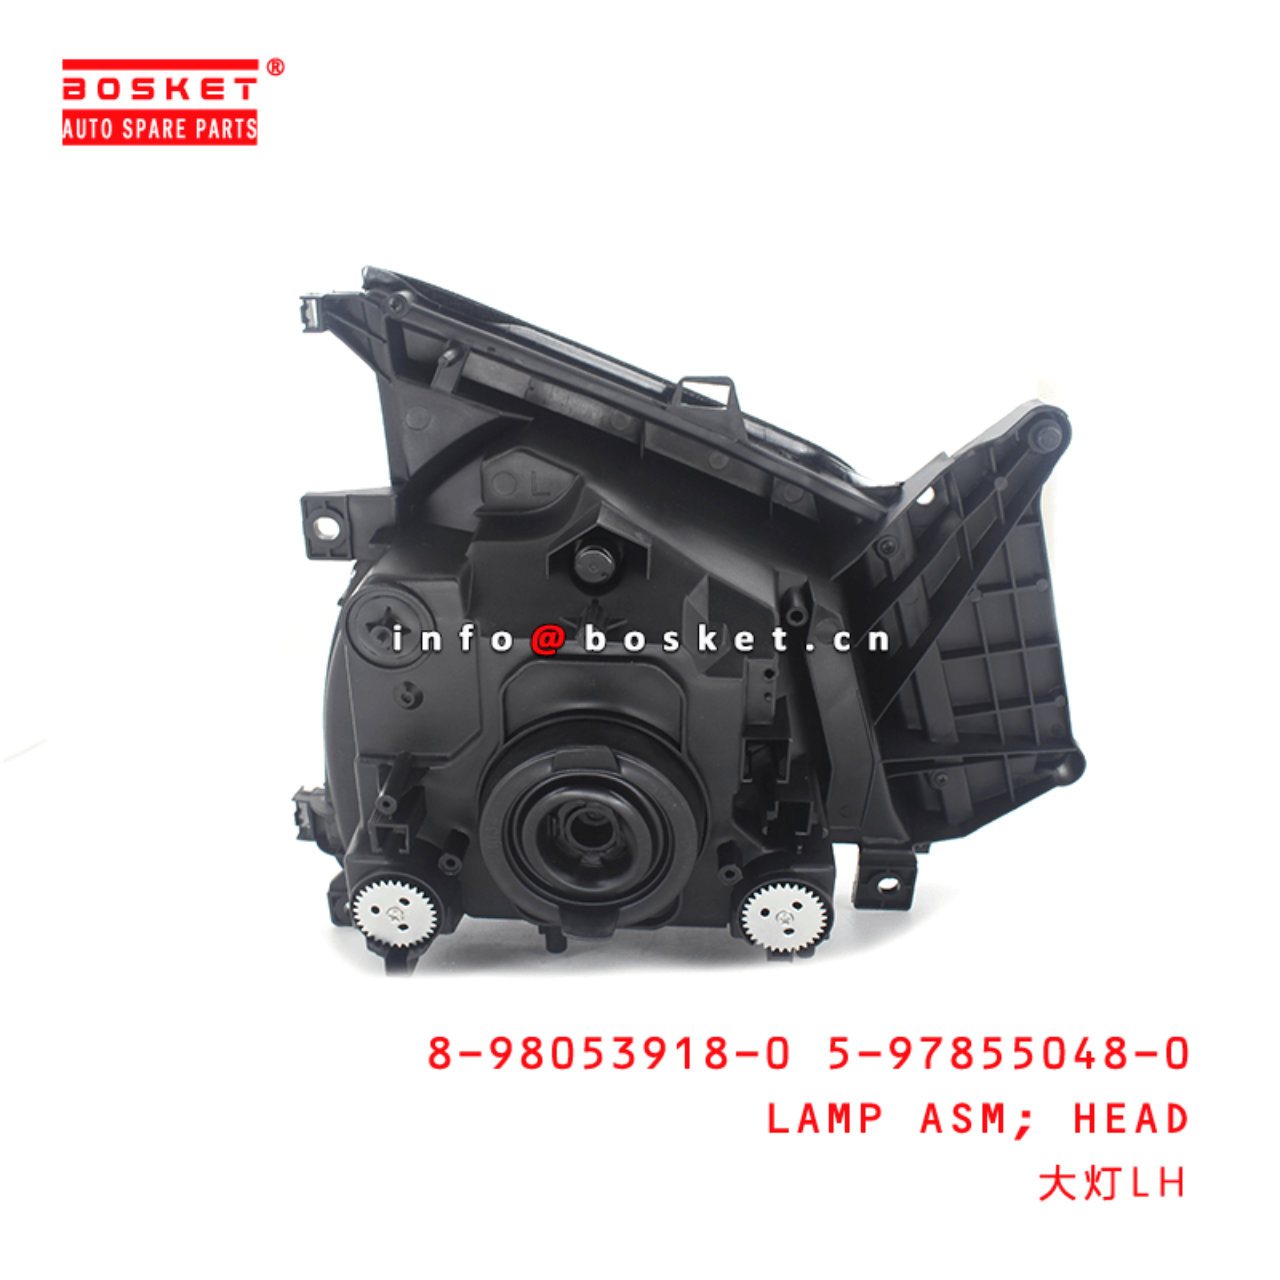 8-98053918-0 5-97855048-0 Head Lamp Assembly 8980539180 5978550480 Suitable for ISUZU 600P